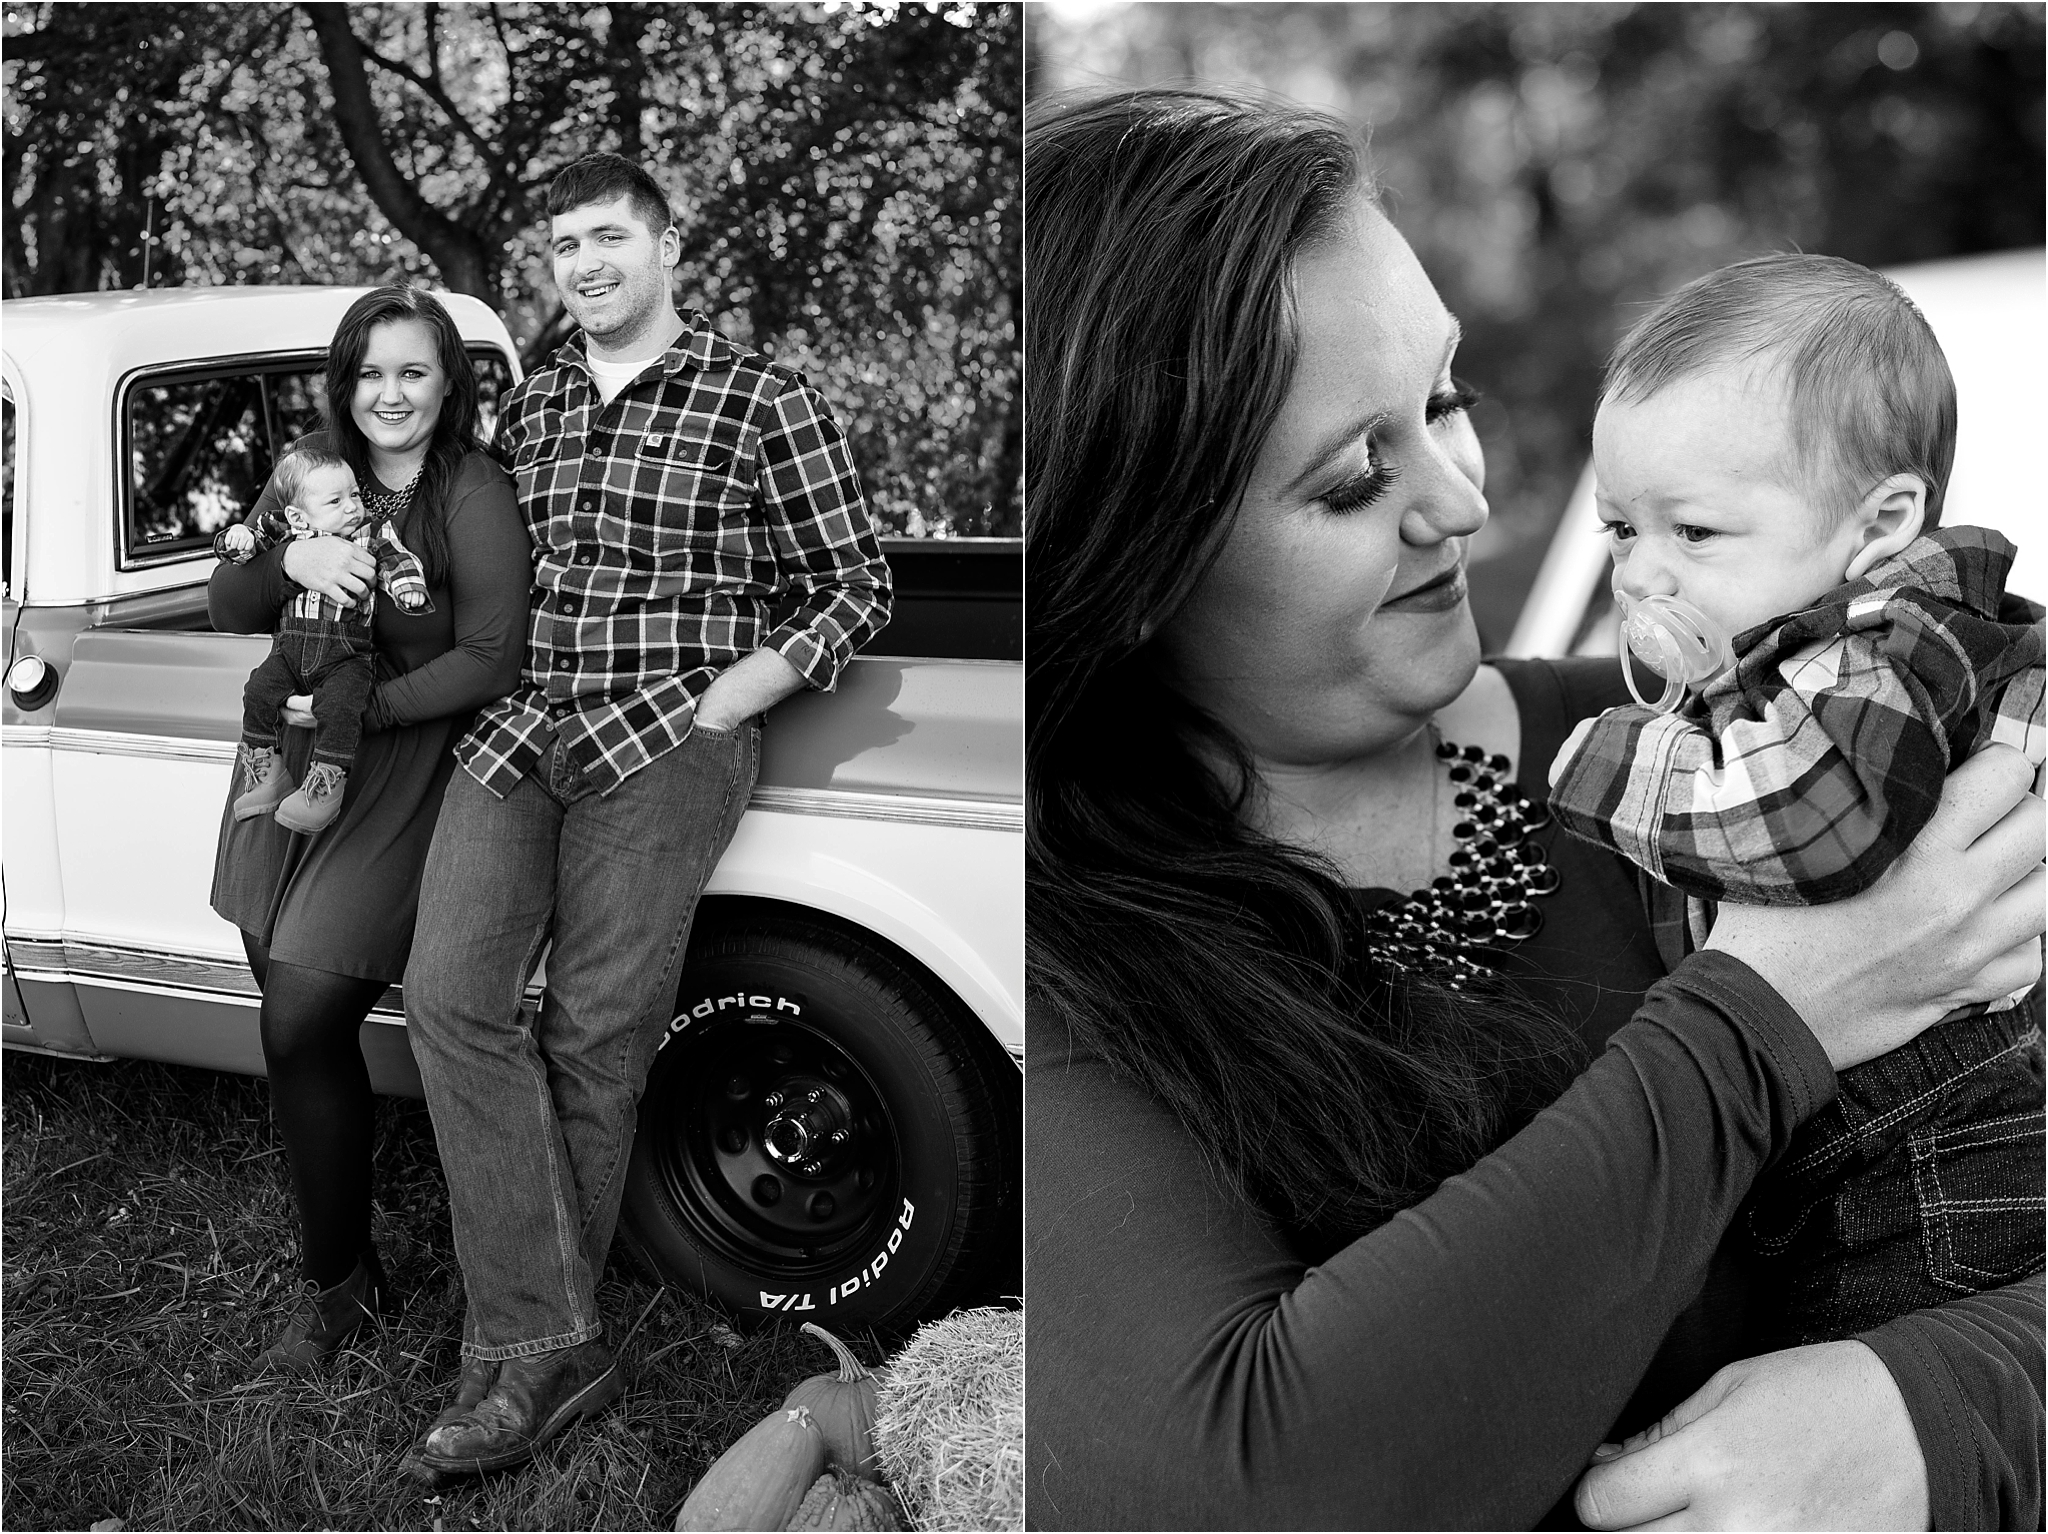 clarksville family photographer, fort campbell family pictures, fall mini